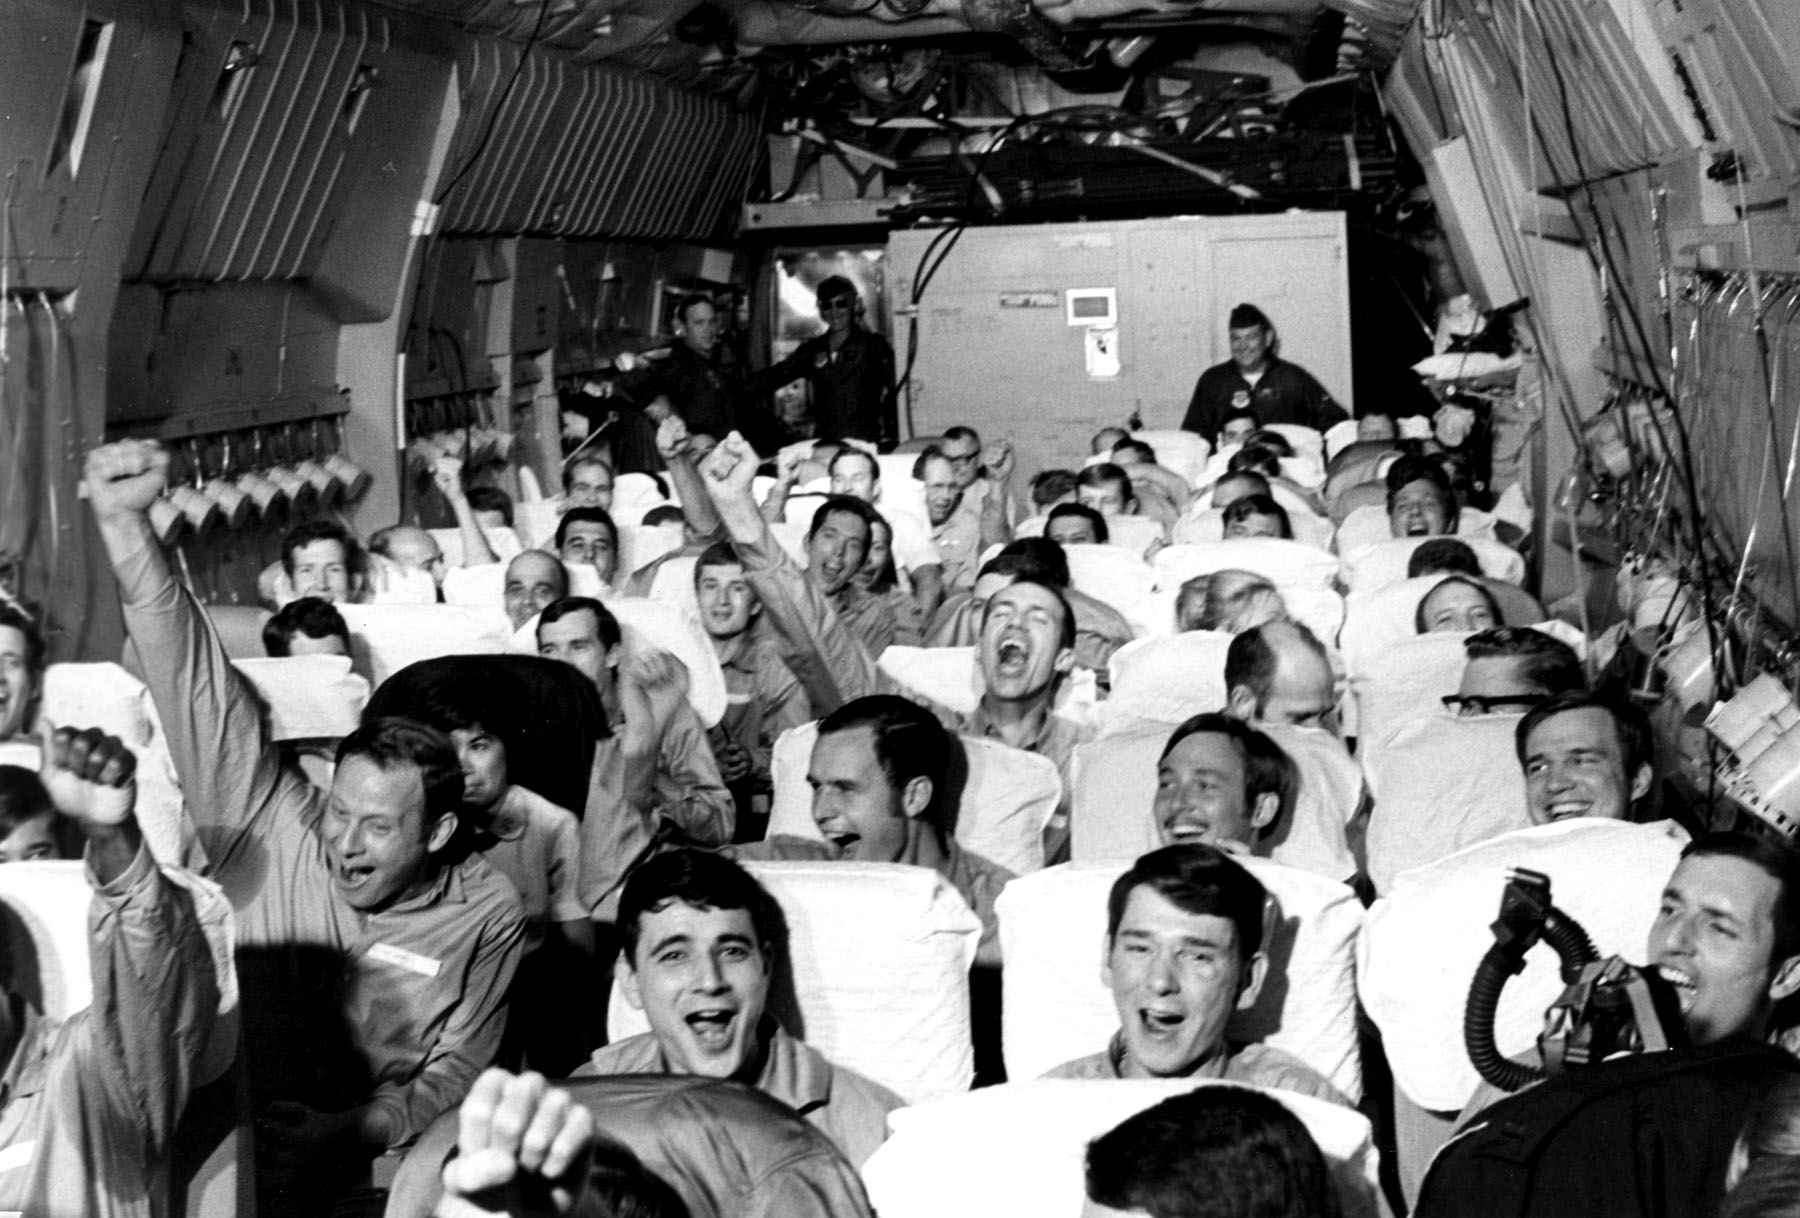 Newly freed POWs in Vietnam celebrate during Operation Homecoming. As their plane lifts off from Hanoi, they know they are finally free